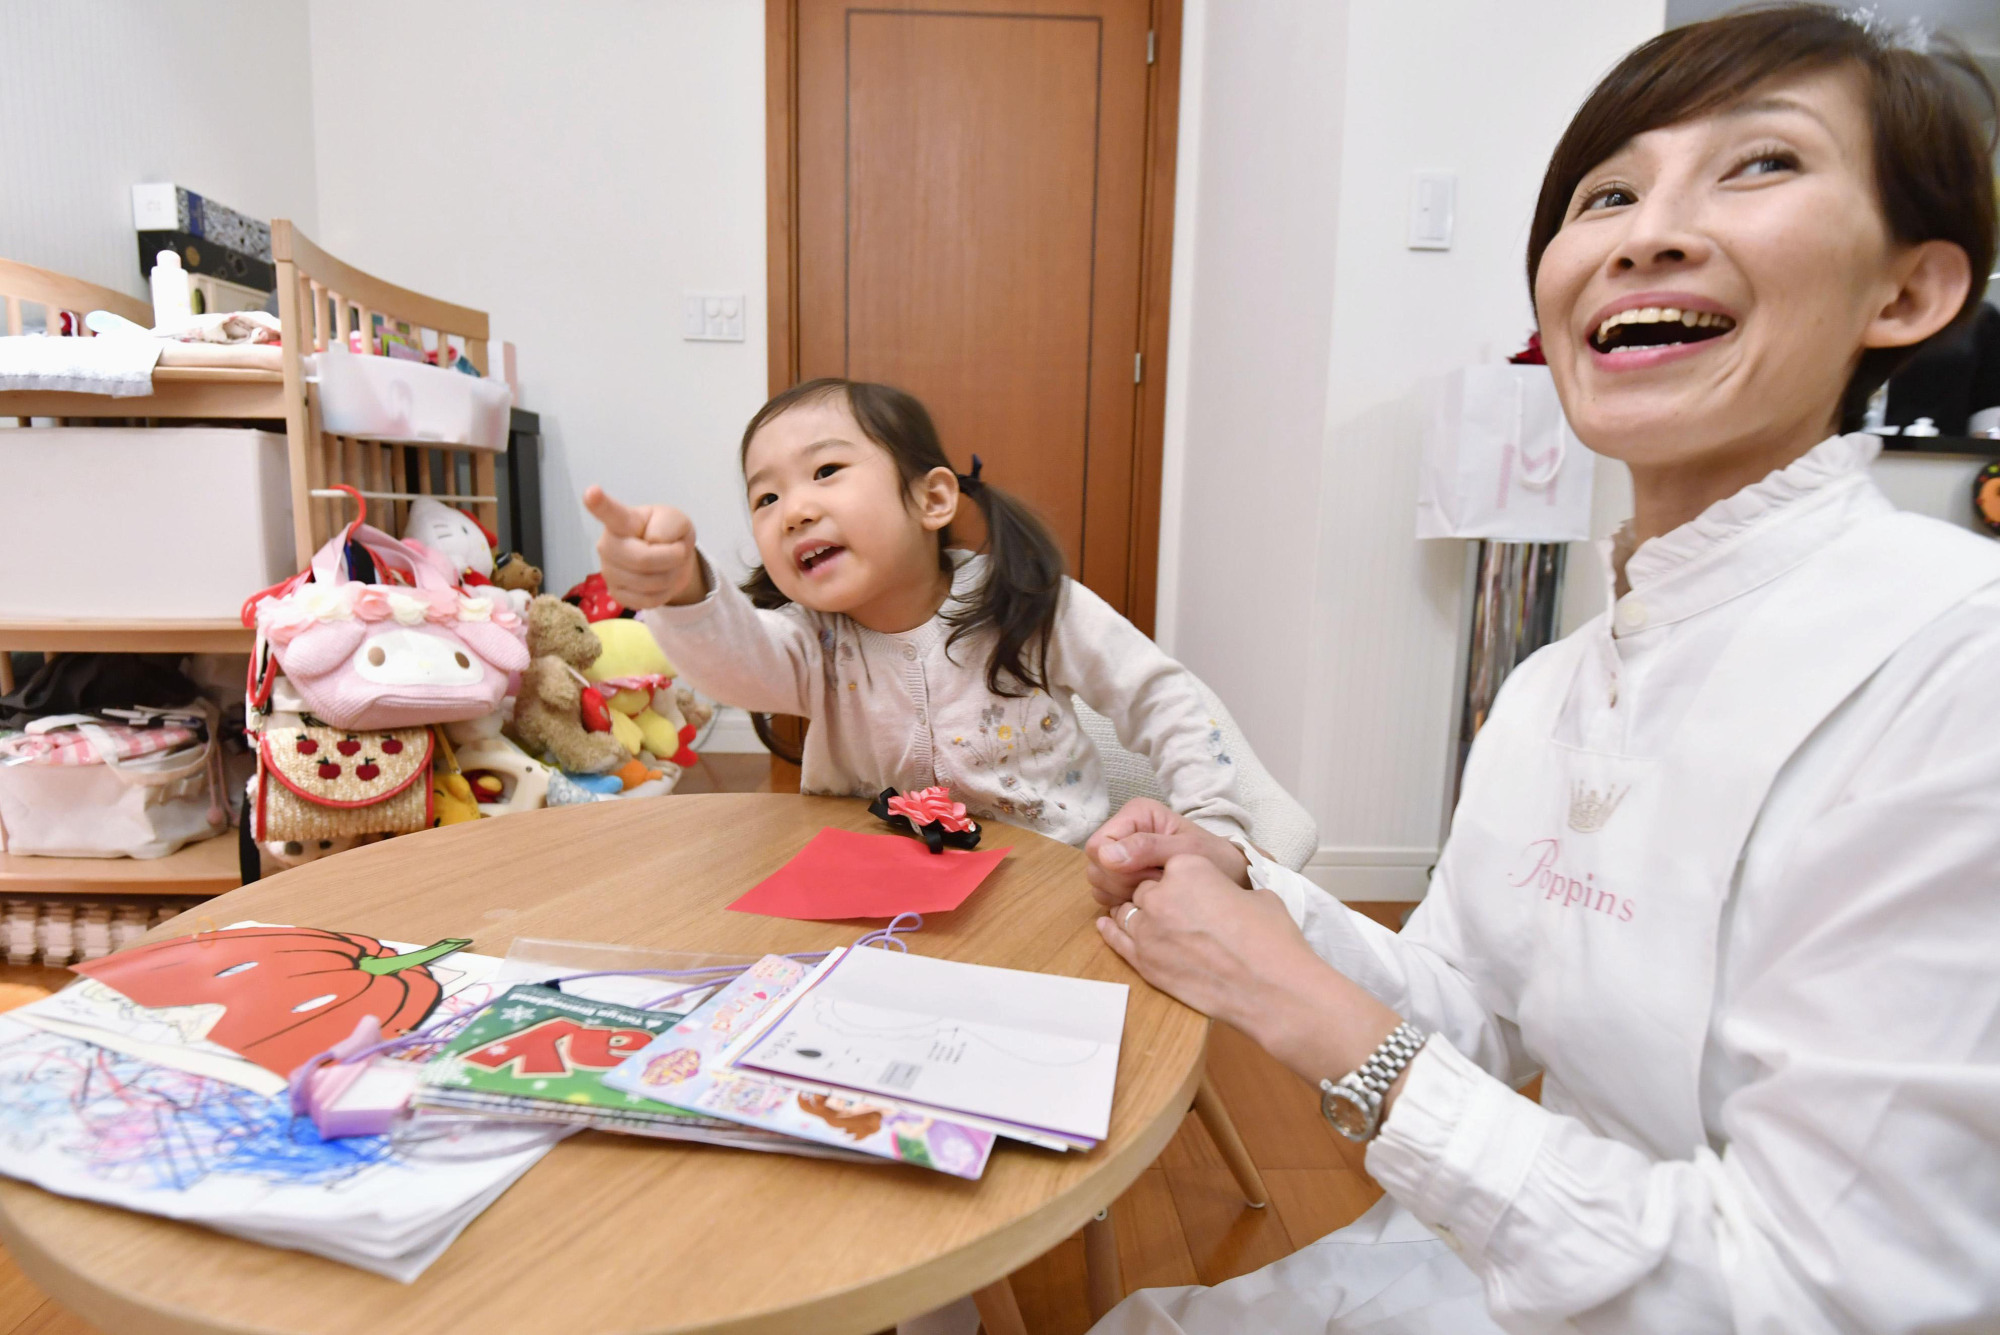 A babysitter looks after a child at a home in Minato Ward, Tokyo. The government's request for schools to close due to the spread of the new coronavirus has prompted some of Japan's overburdened working parents to try housekeeping and babysitting services for the first time. | KYODO